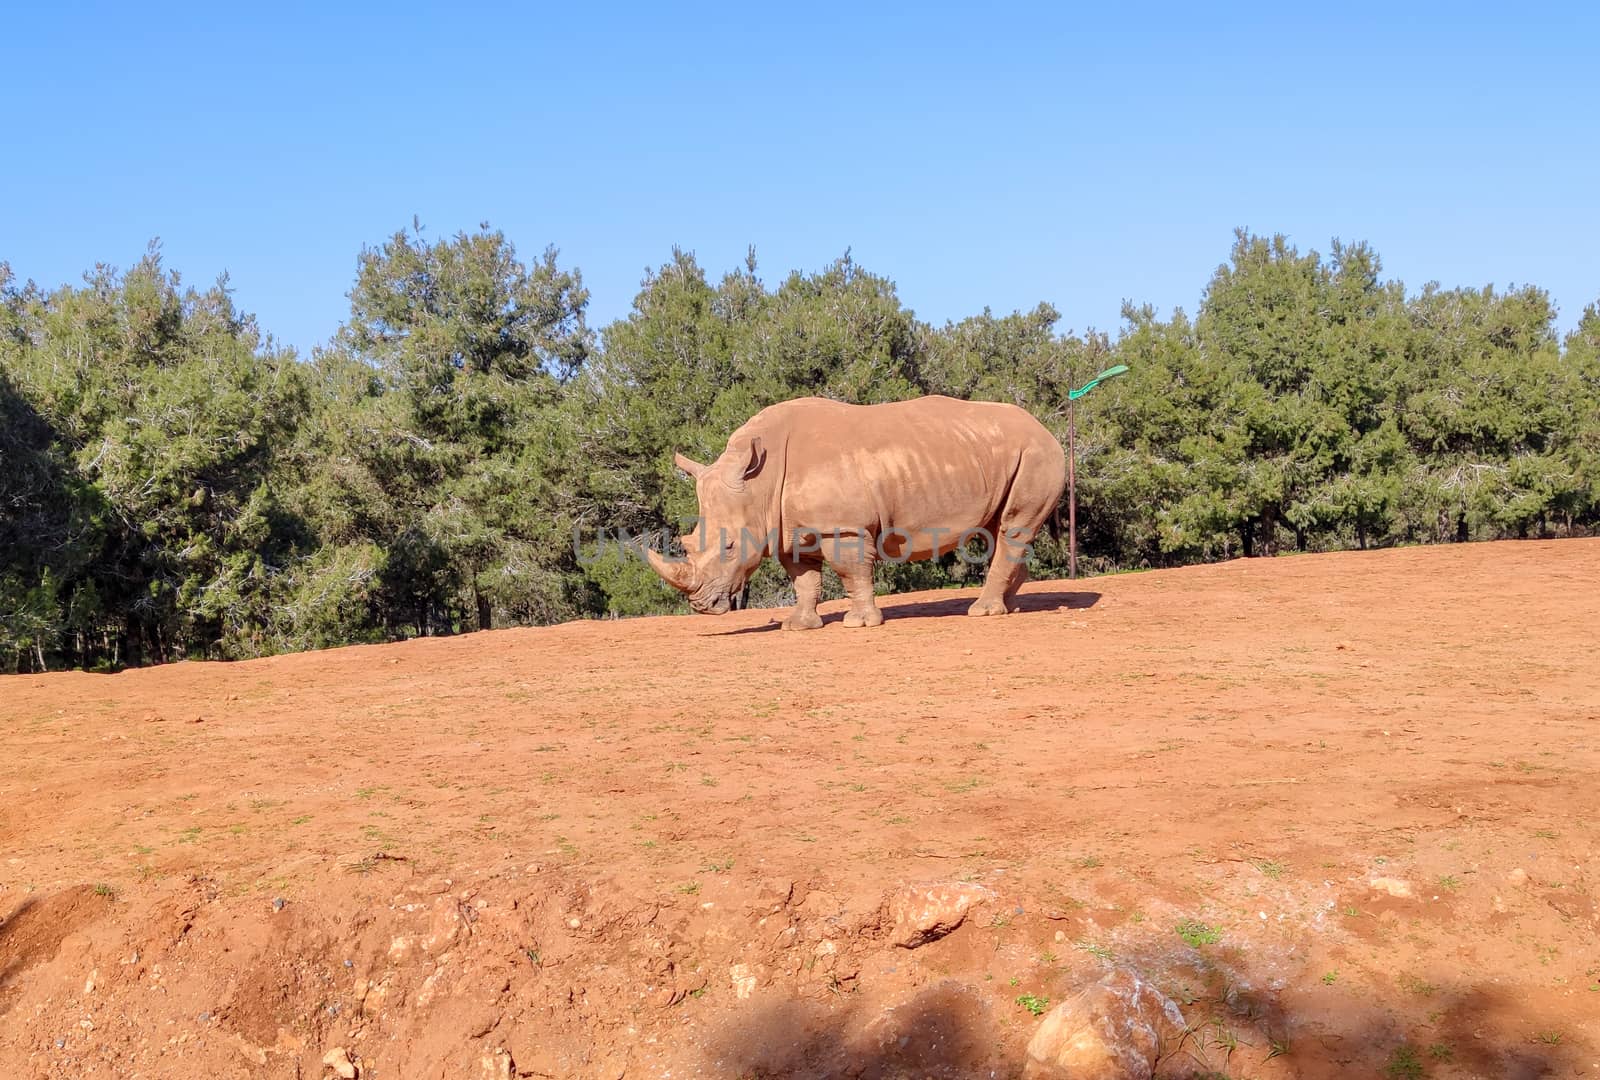 A huge rhino standing in the zoo by devoxer